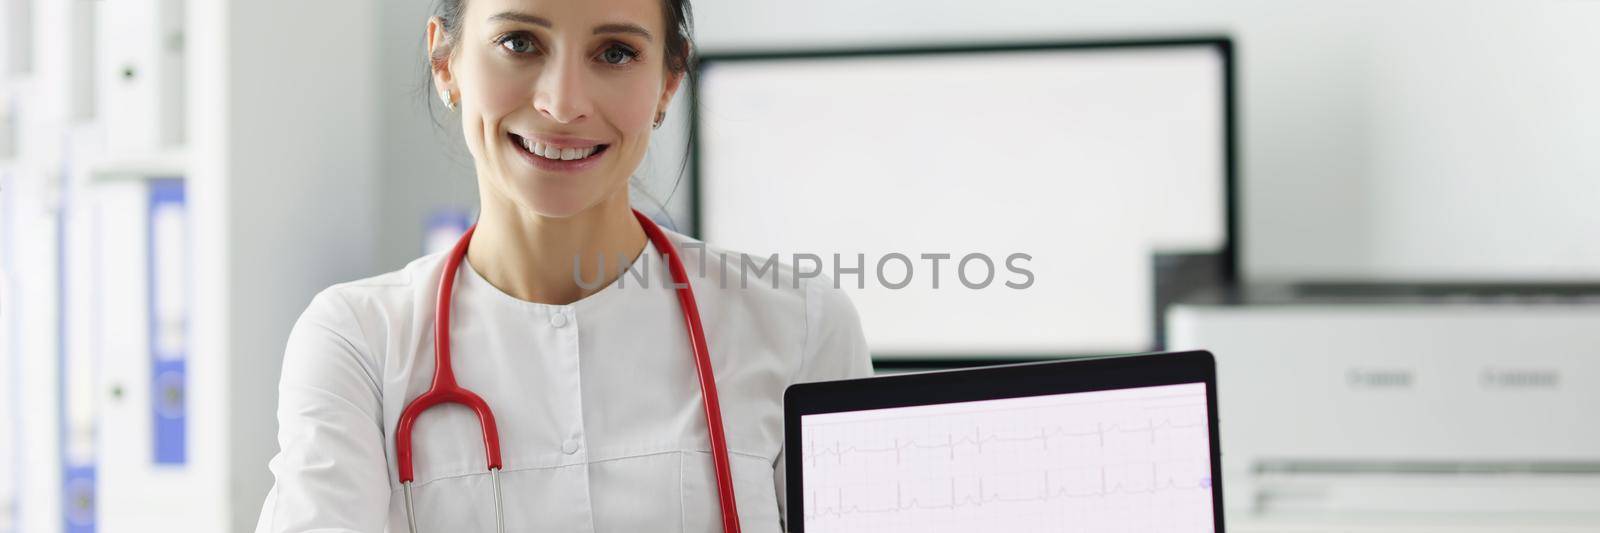 Doctor cardiologist showing electrocardiogram on digital tablet. ECG decoding concept training course